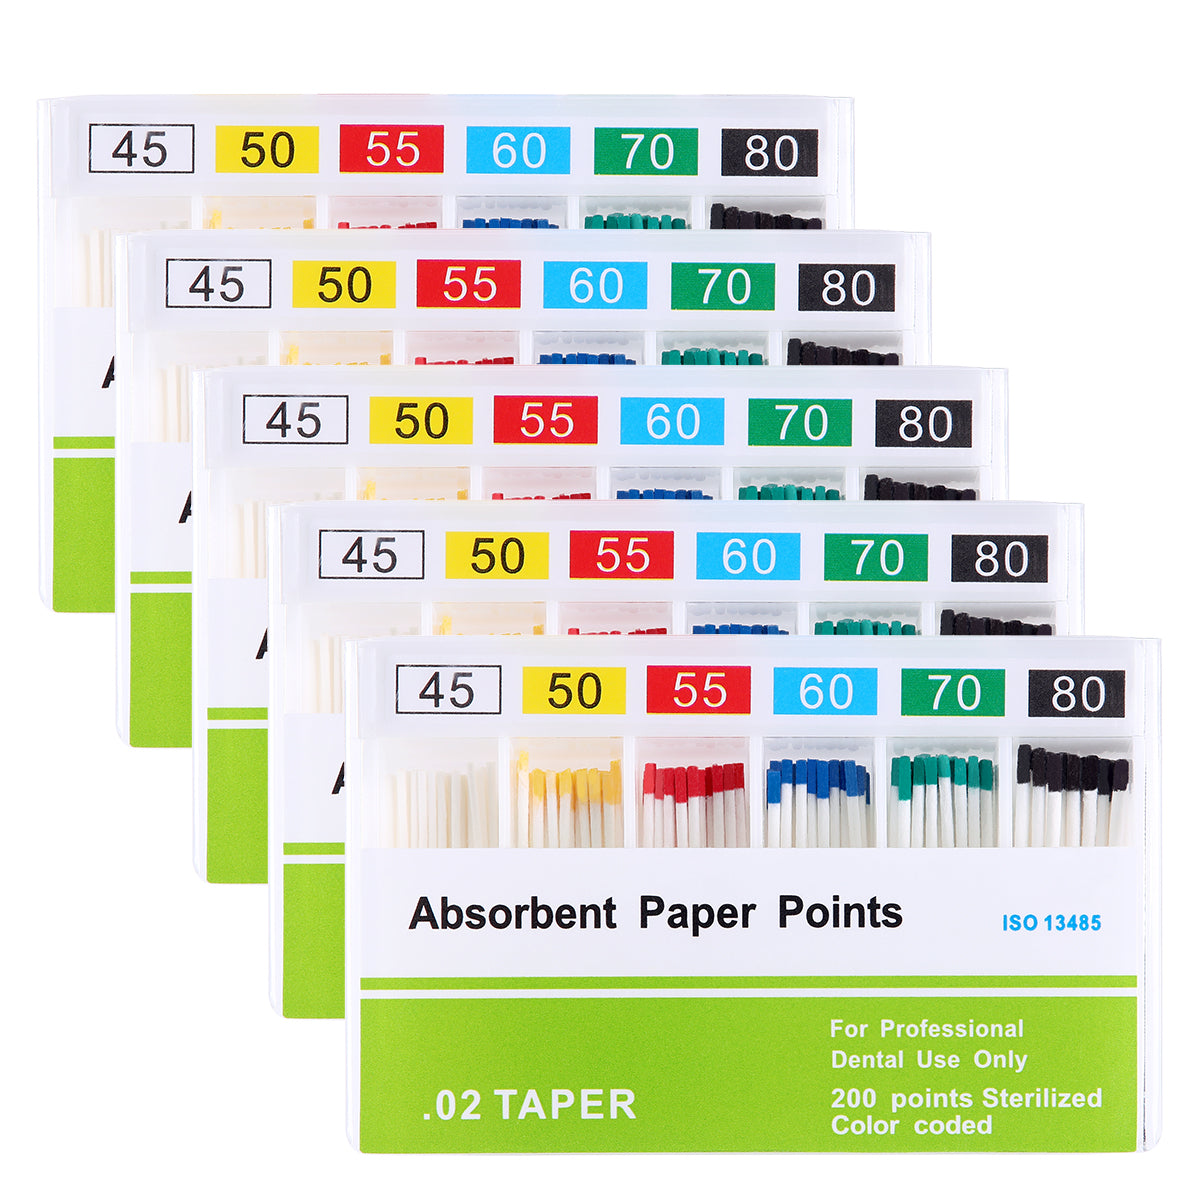 5 Boxes Absorbent Paper Points #45-80 Taper Size 0.02 Color Coded 200/Box - azdentall.com